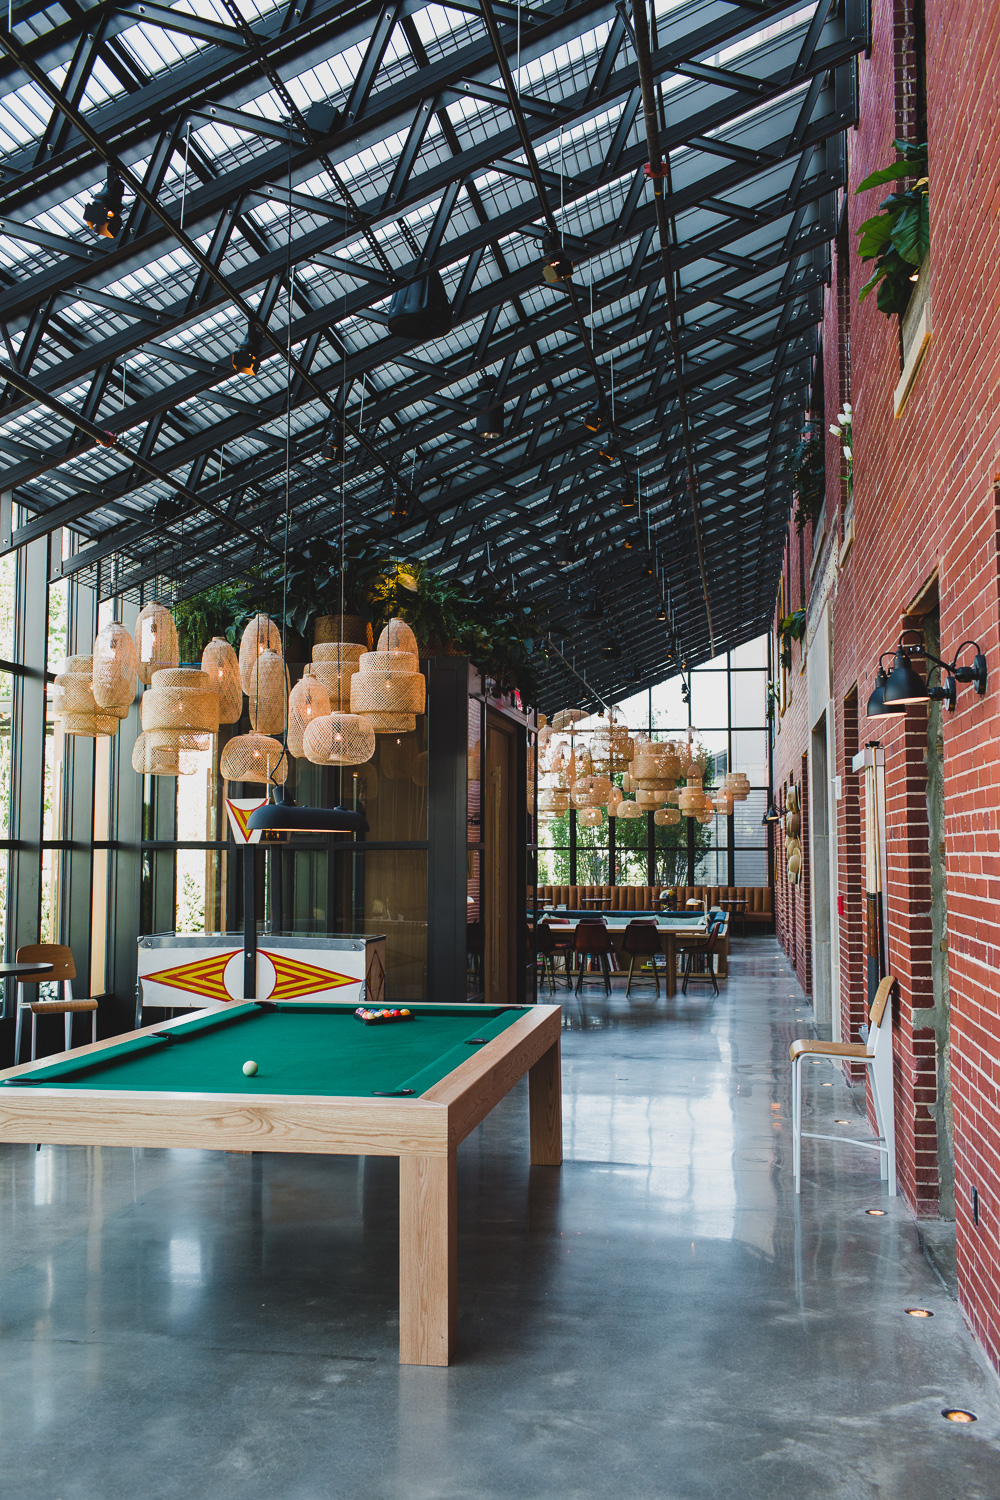 The Asbury Hotel lobby with pool table | blog.cassiecastellaw.com